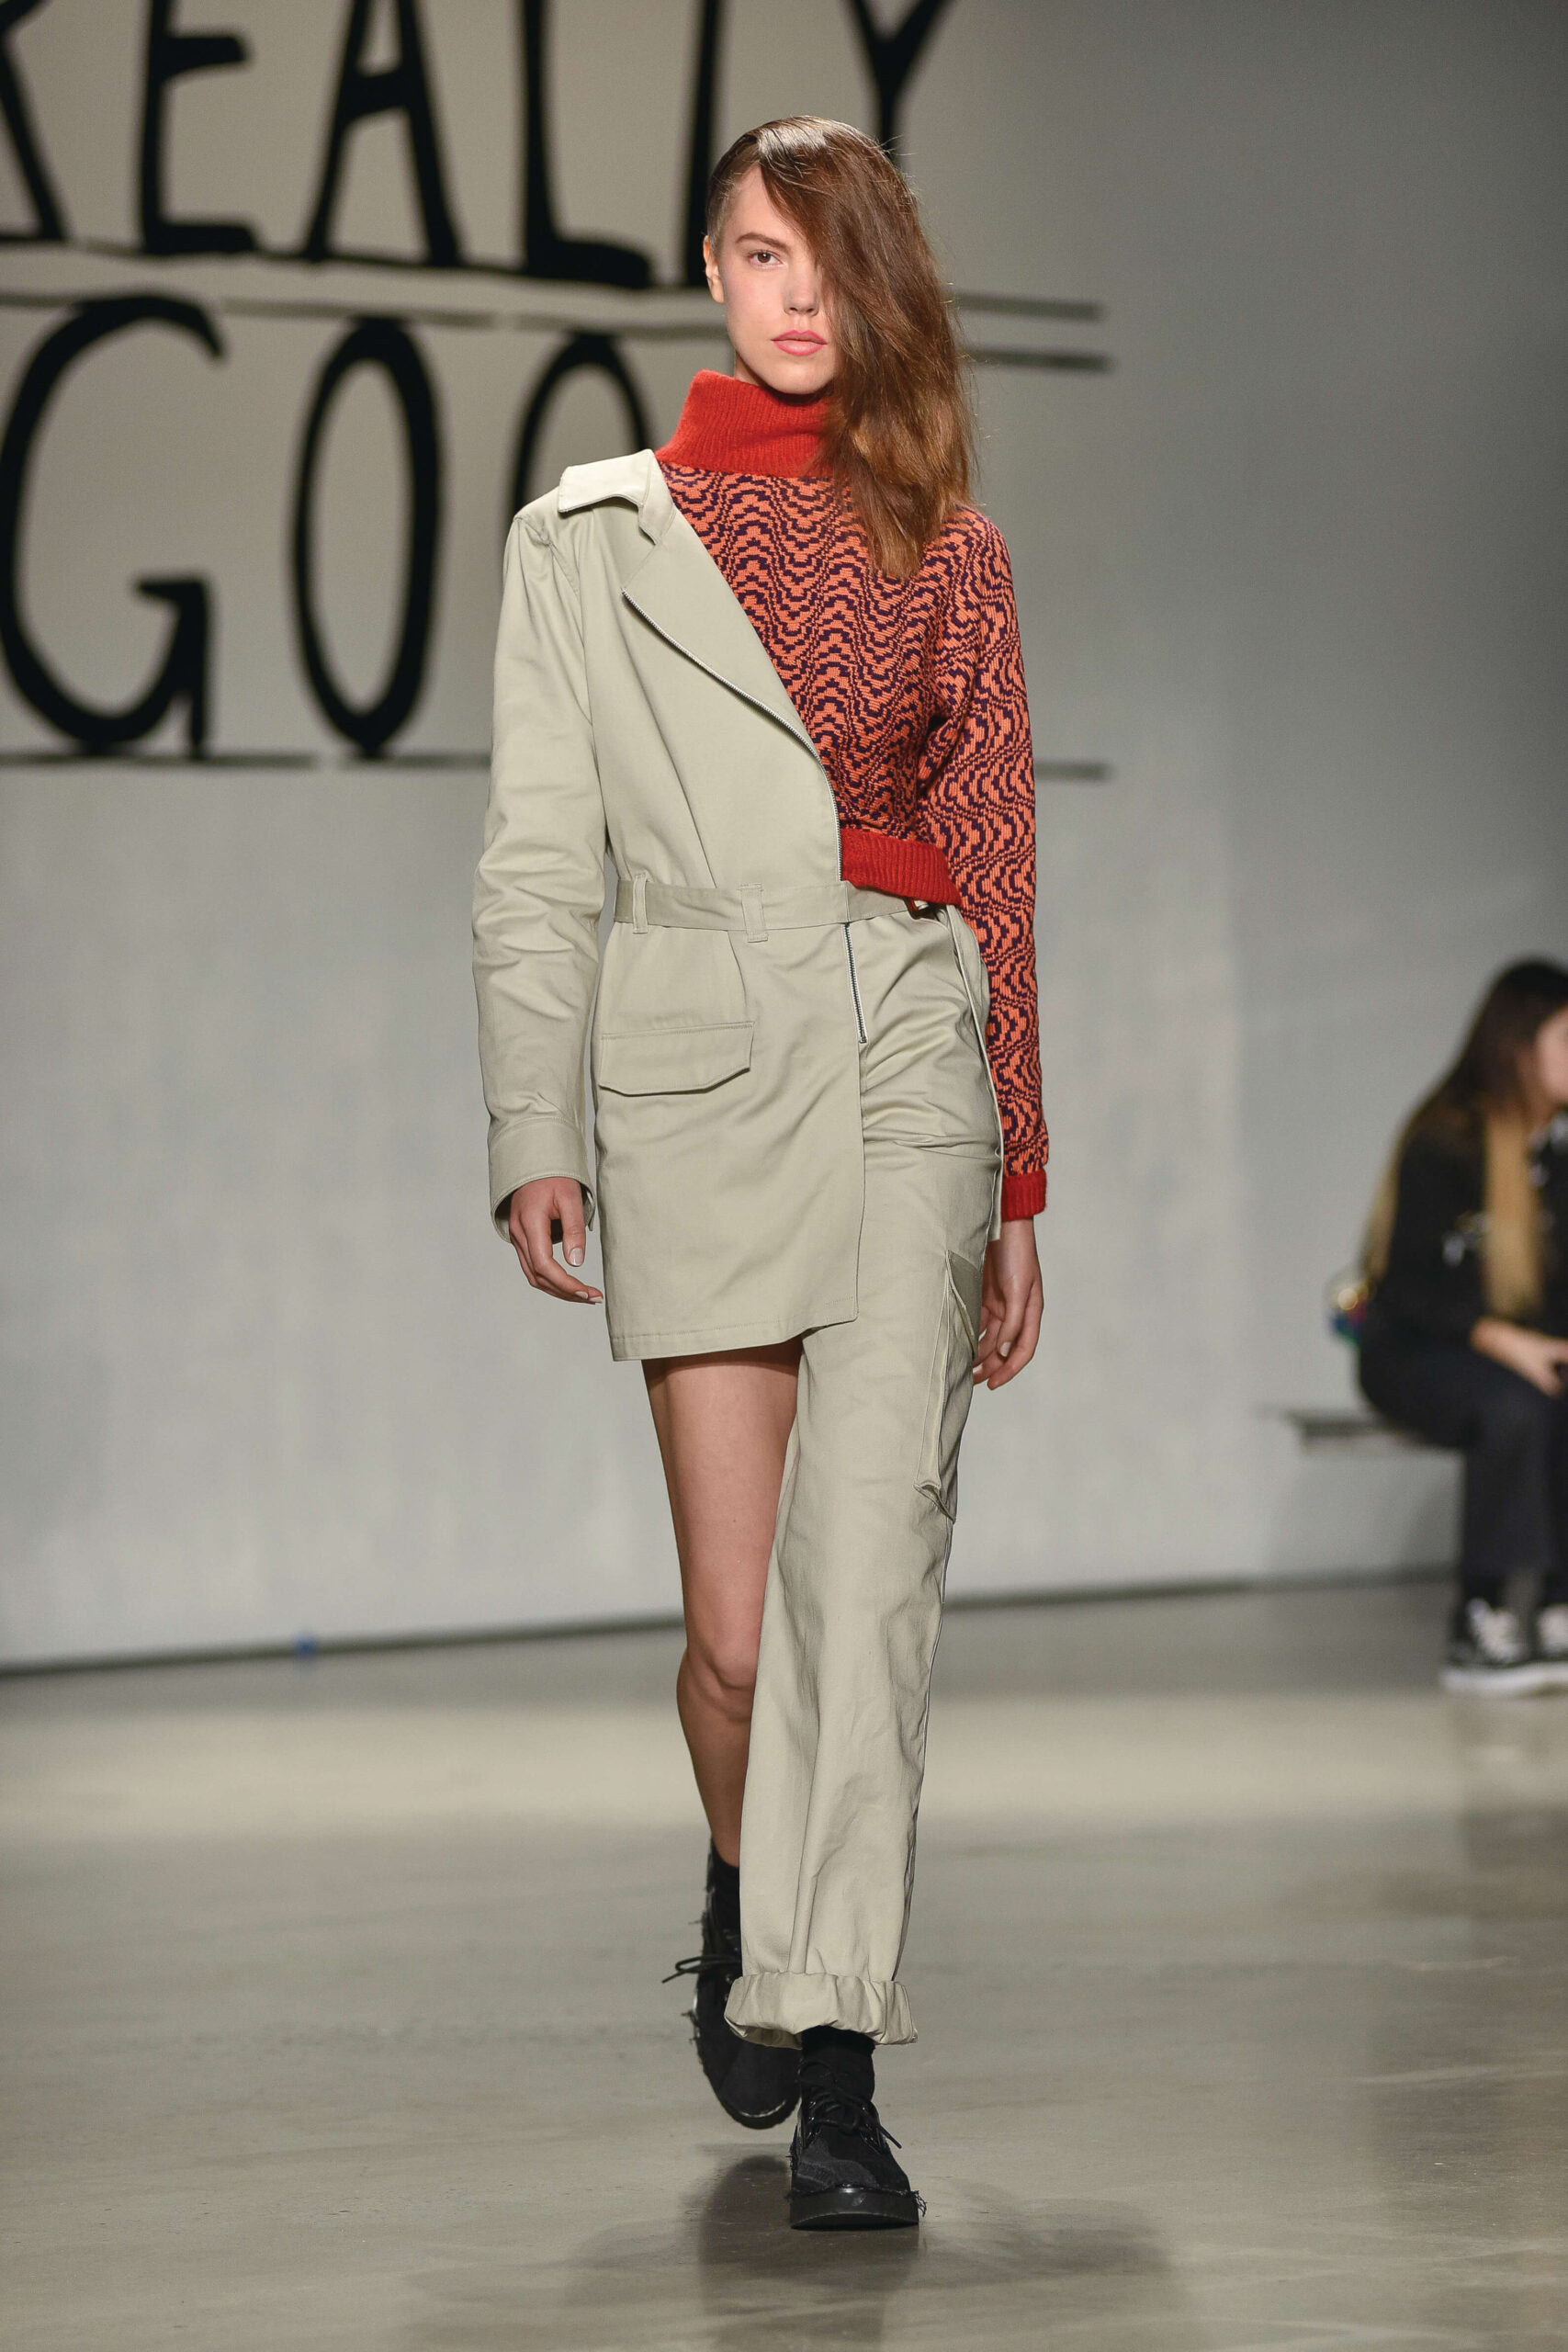 A model walks along a catwalk wearing a beige suit. The pant's right leg is cropped to the length of a short, while the left leg has a normal pant length. The suit's blazer is diagonally divided in beige and red.